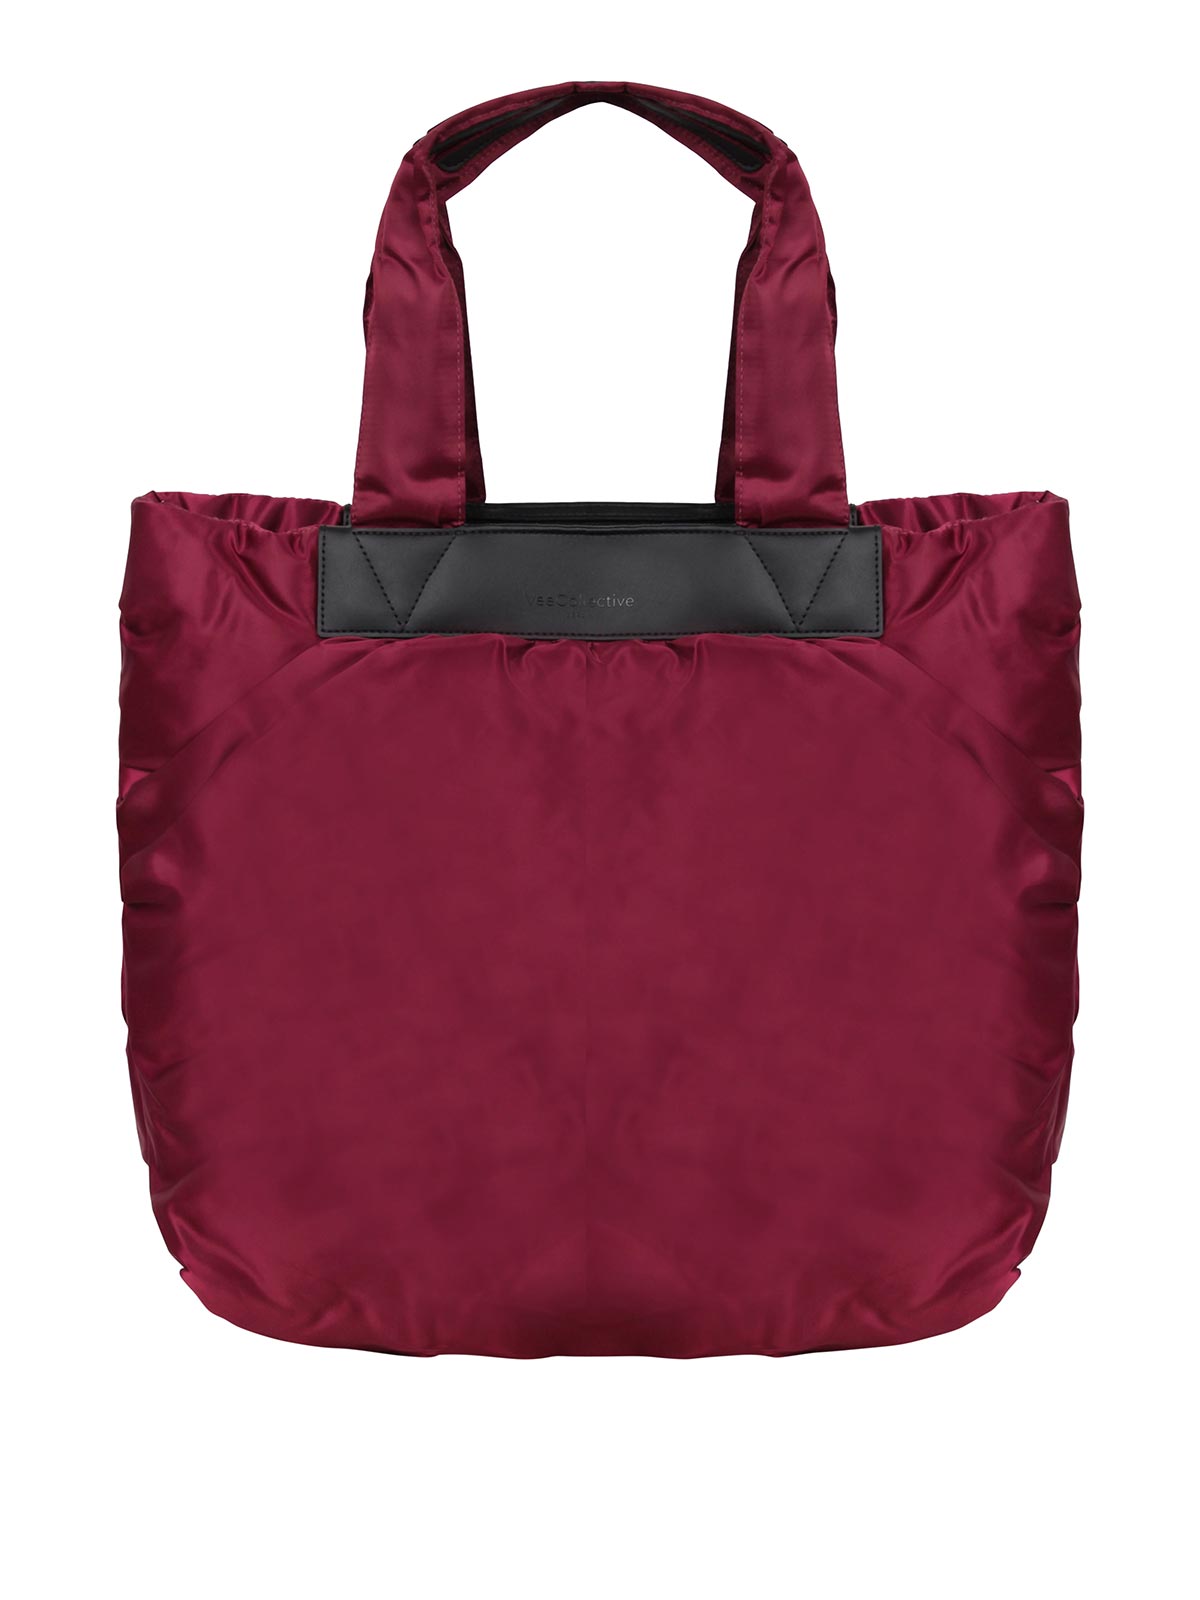 Veecollective Large Caba Tote Bag With Ruffles In Red